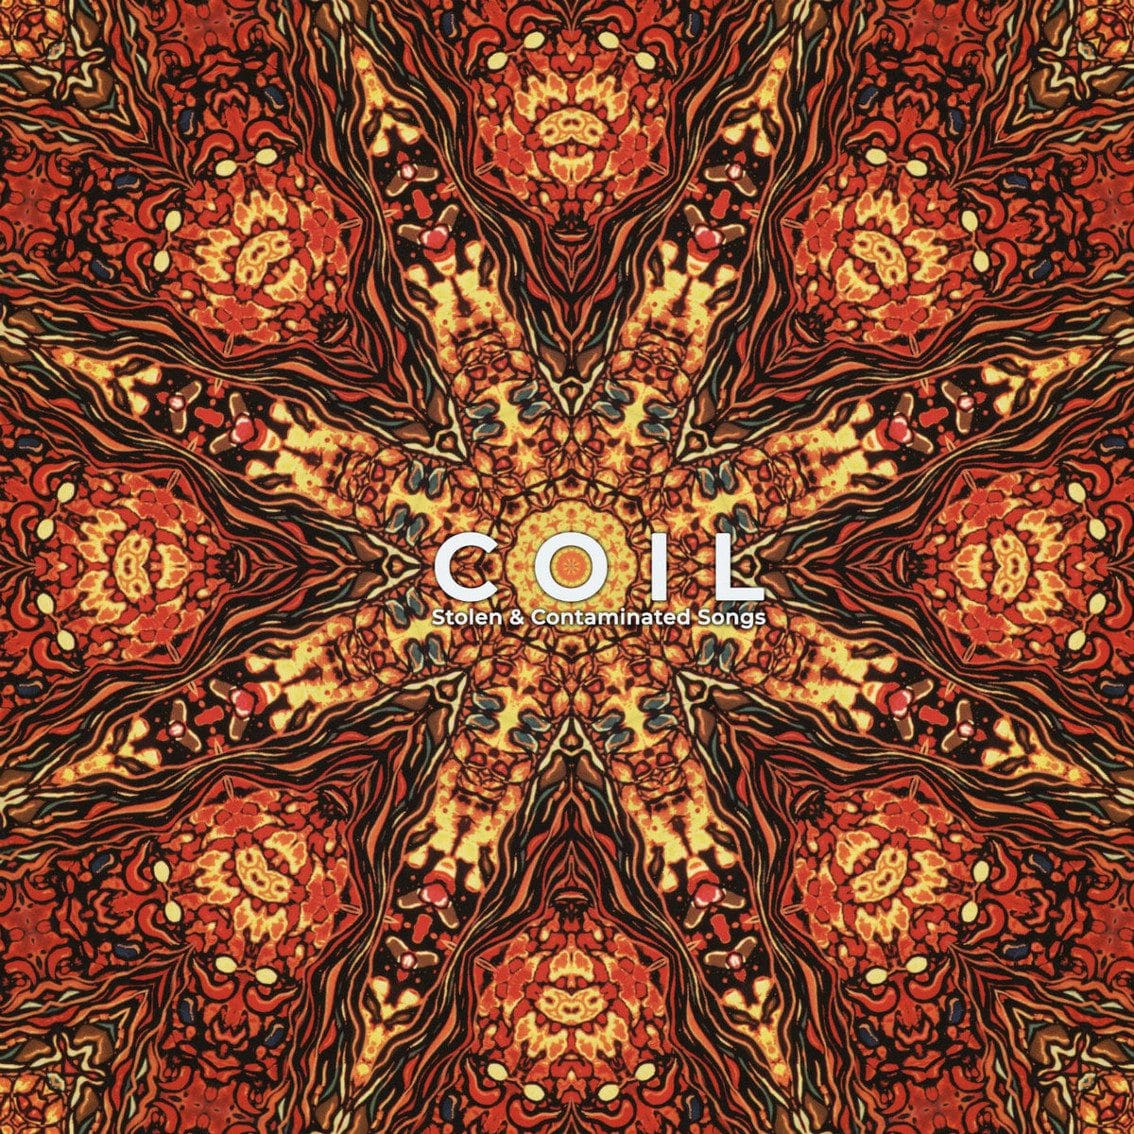 Coil's 1992 album 'Stolen & Contaminated Songs' gets reissue on CD + two vinyl editions